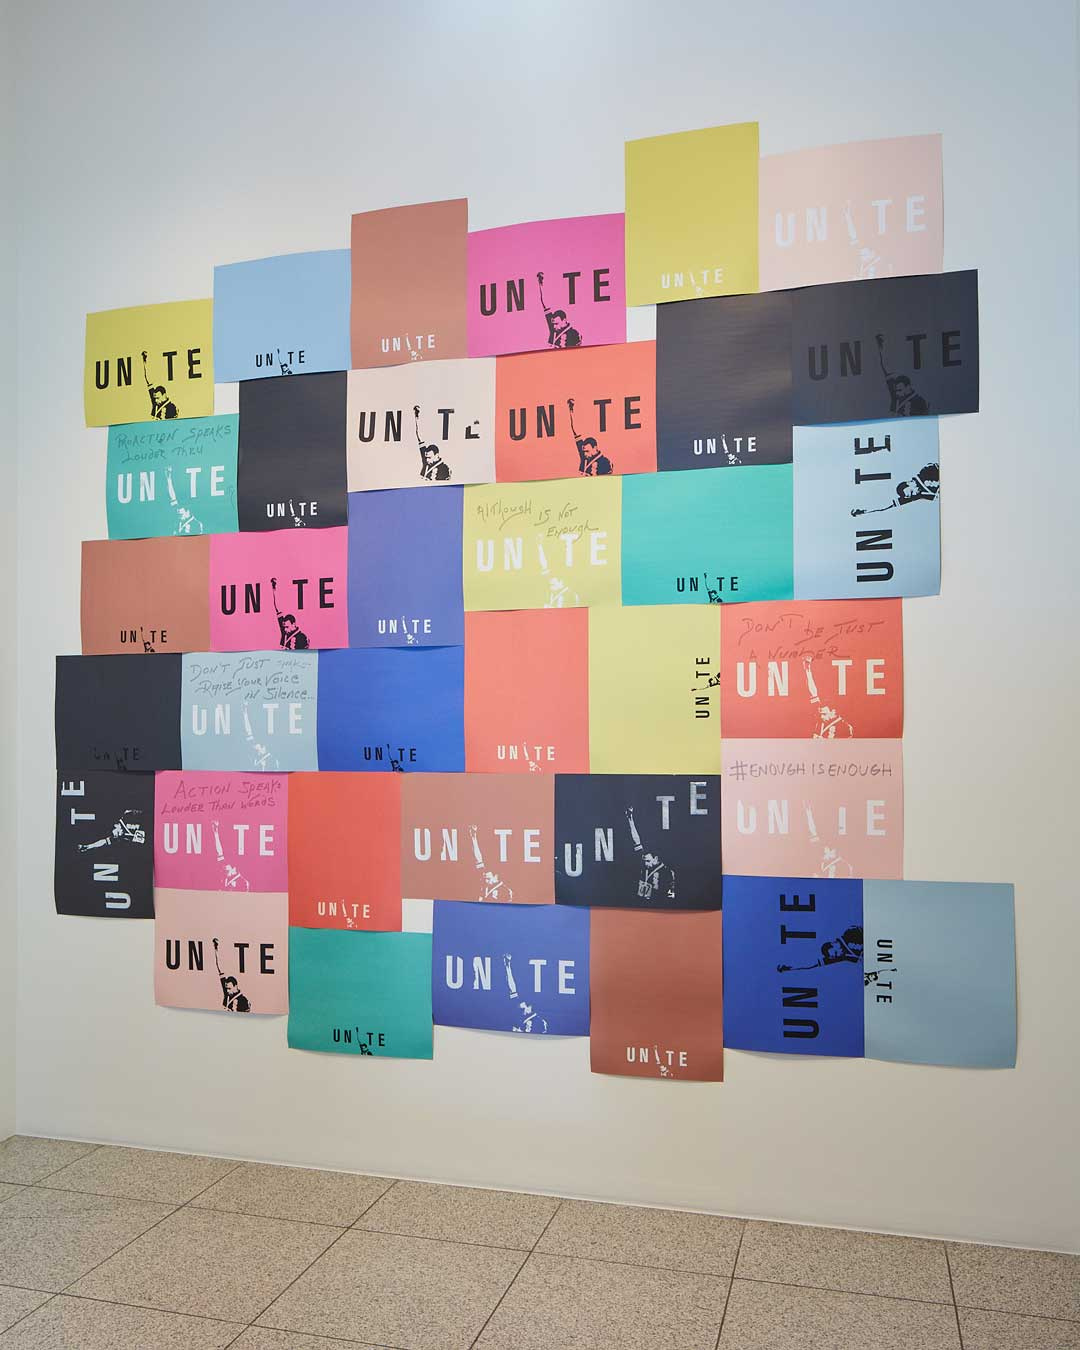 Thirty five pieces of rectangular, multi-colored paper posted on a wall with the word UNITE printed on them. Several have a man with his head lowered while raising his arm and fist high.